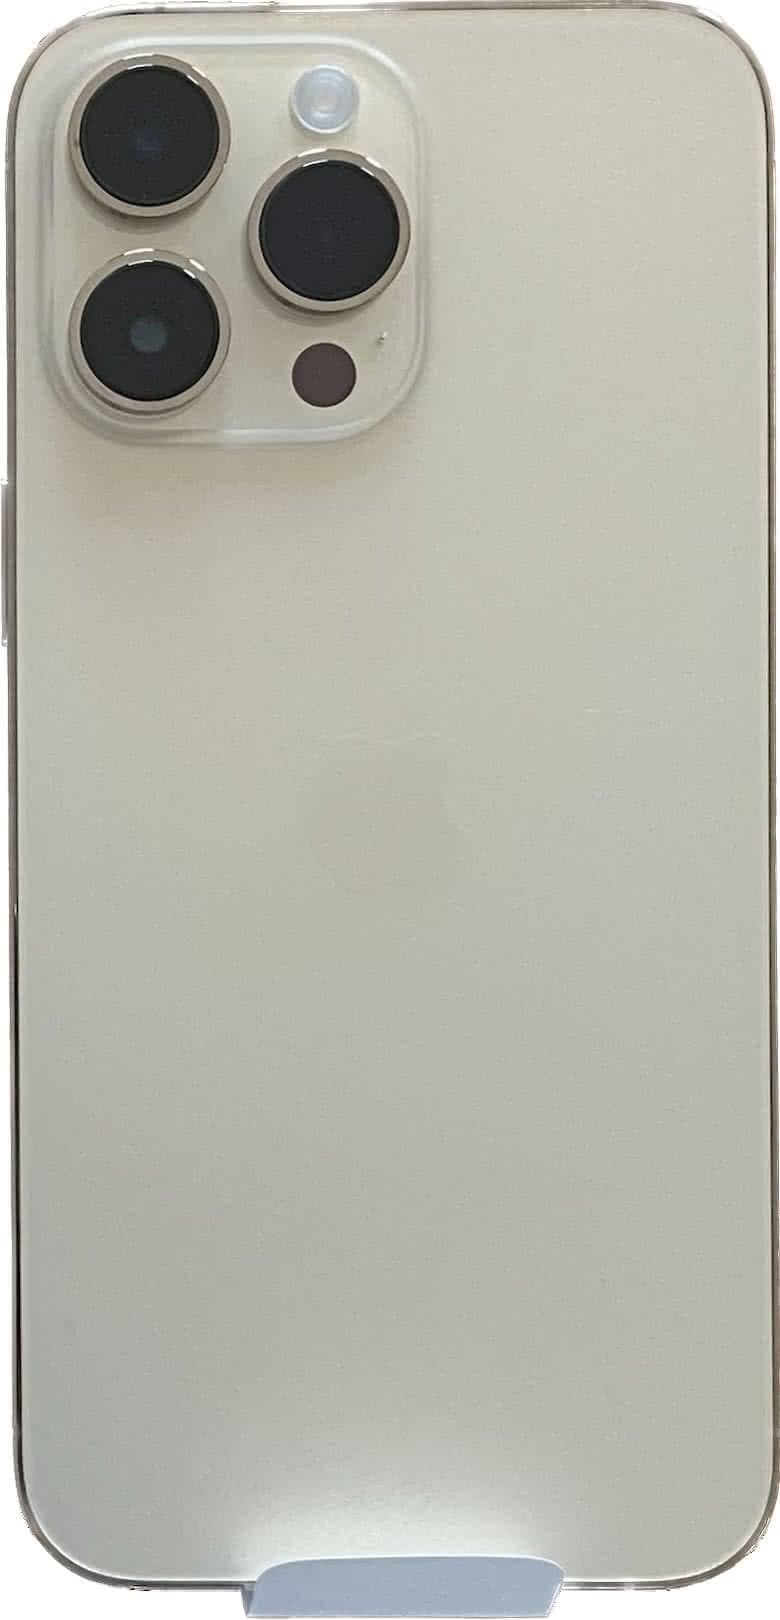 Photo 9: Apple iPhone 14 Pro Max in gold colour, back side